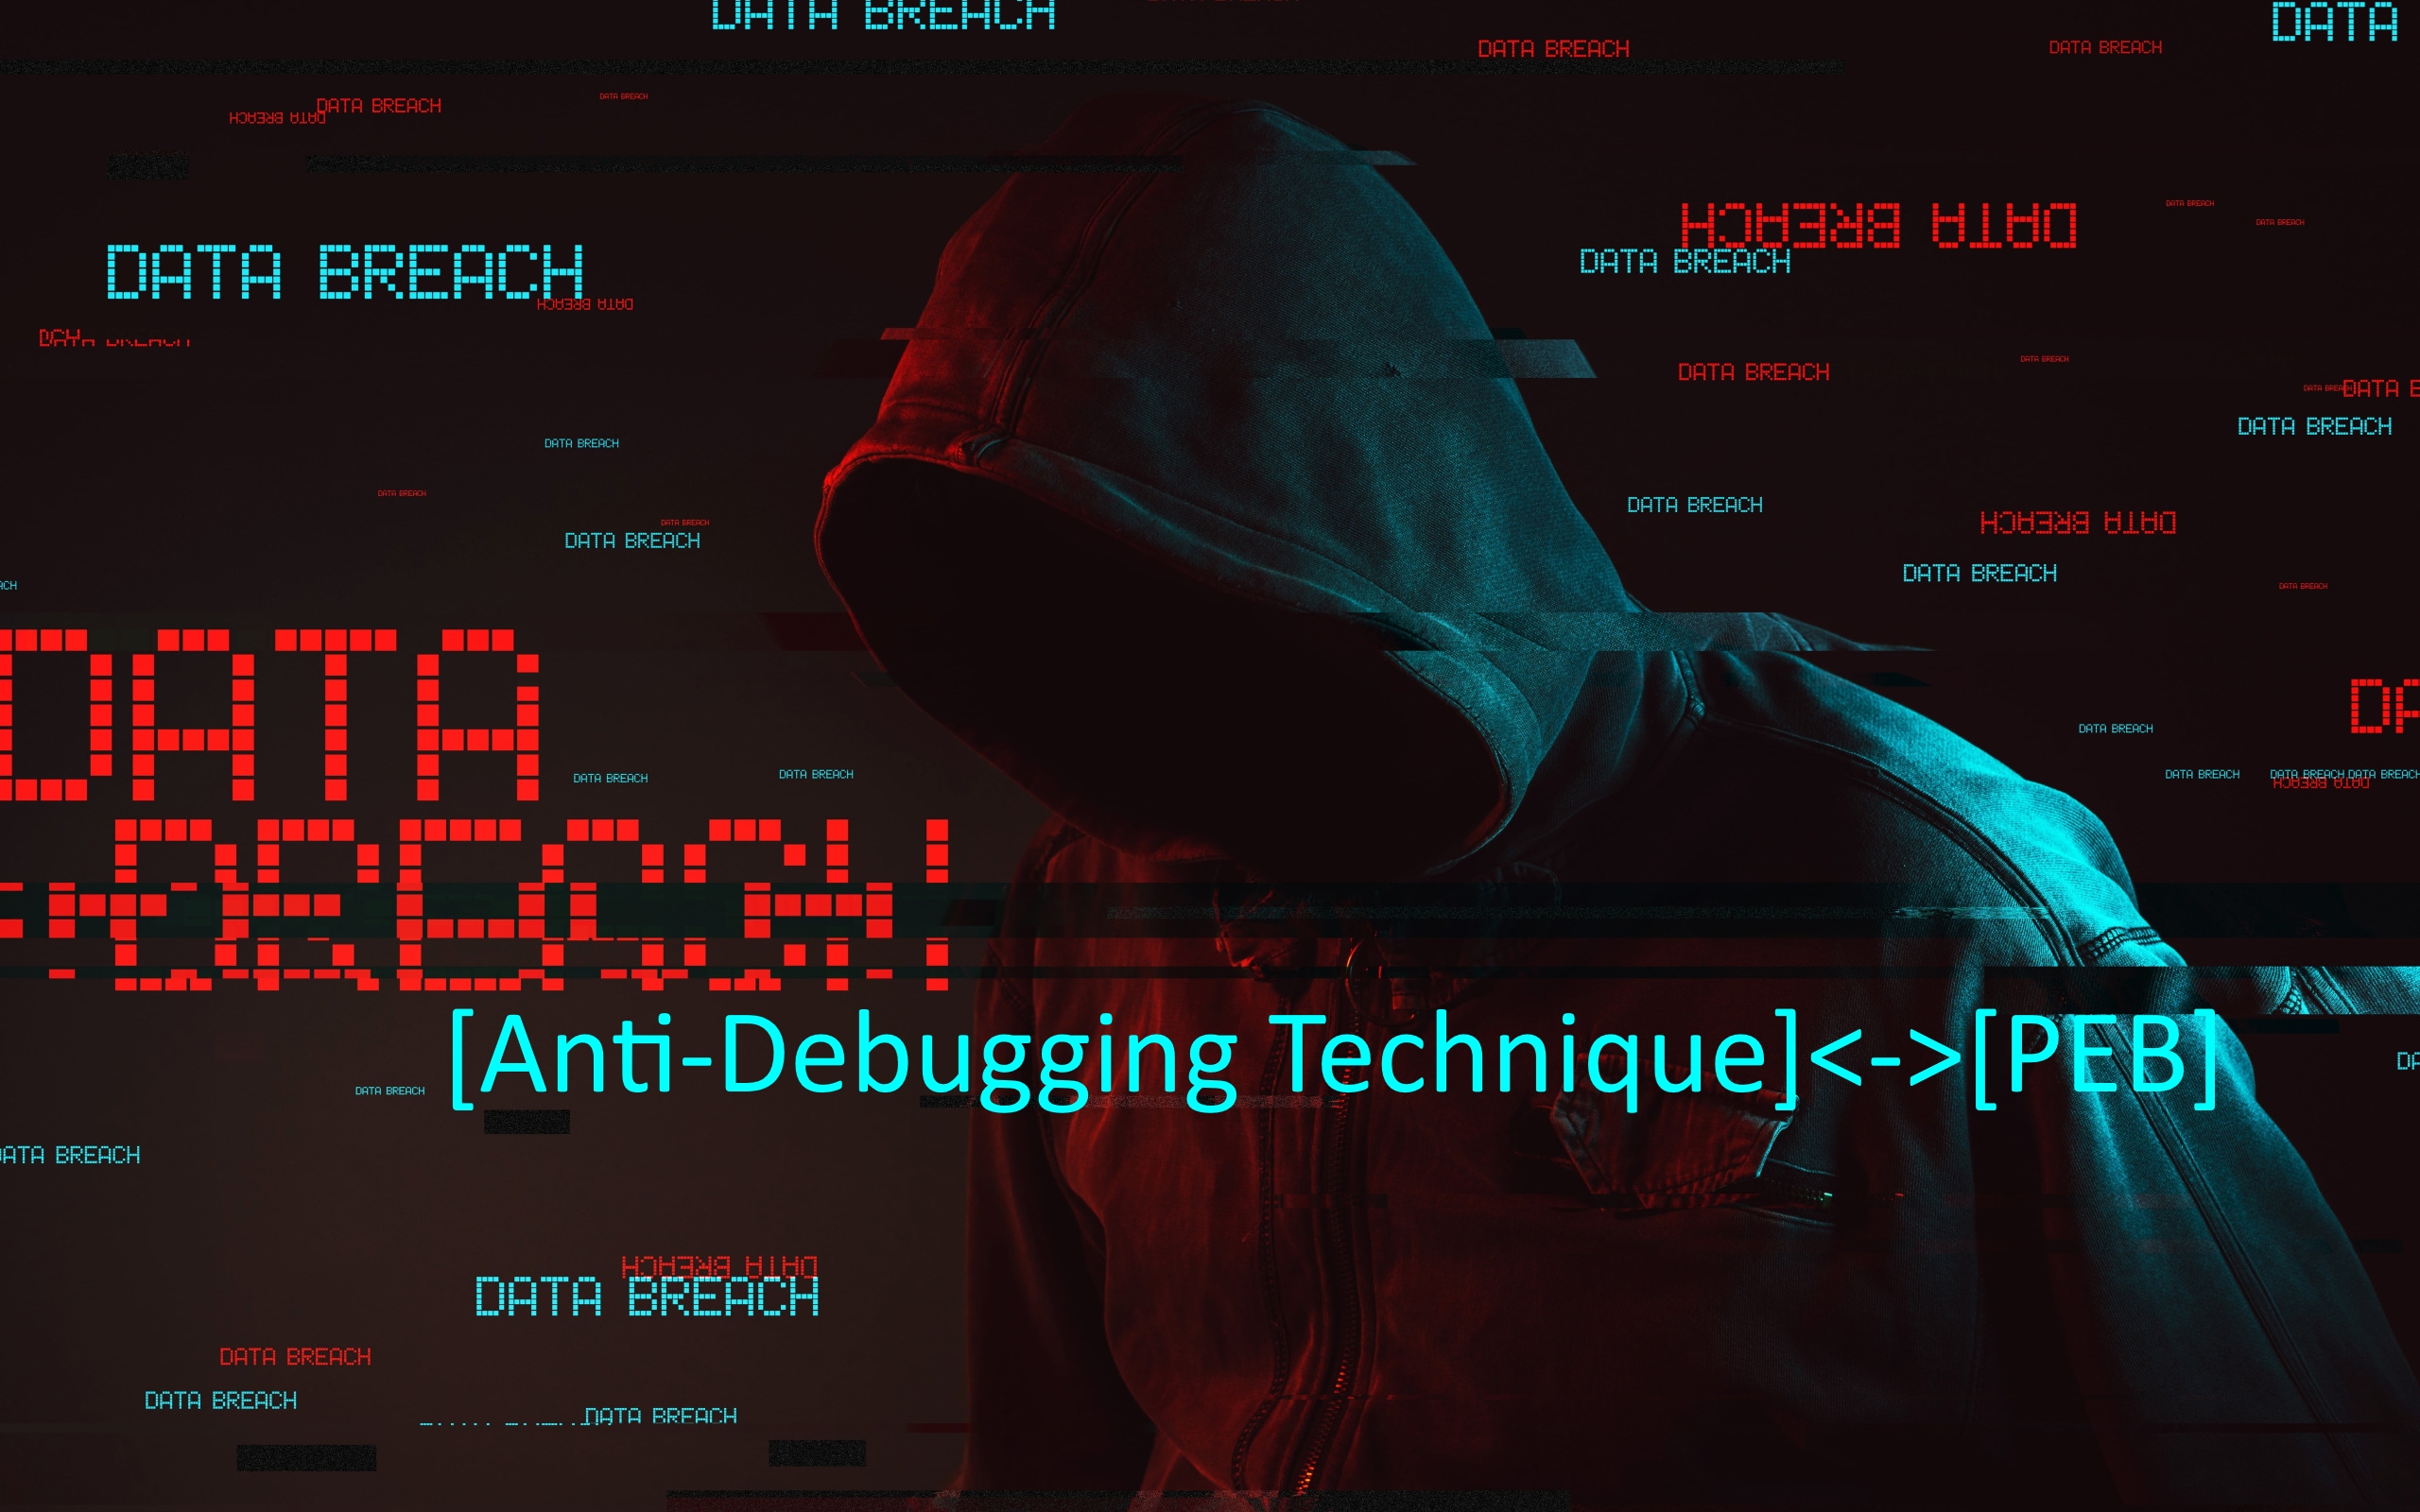 [Anti-Debugging Technique]-[PEB] for ScriptKiddy. By MASM32